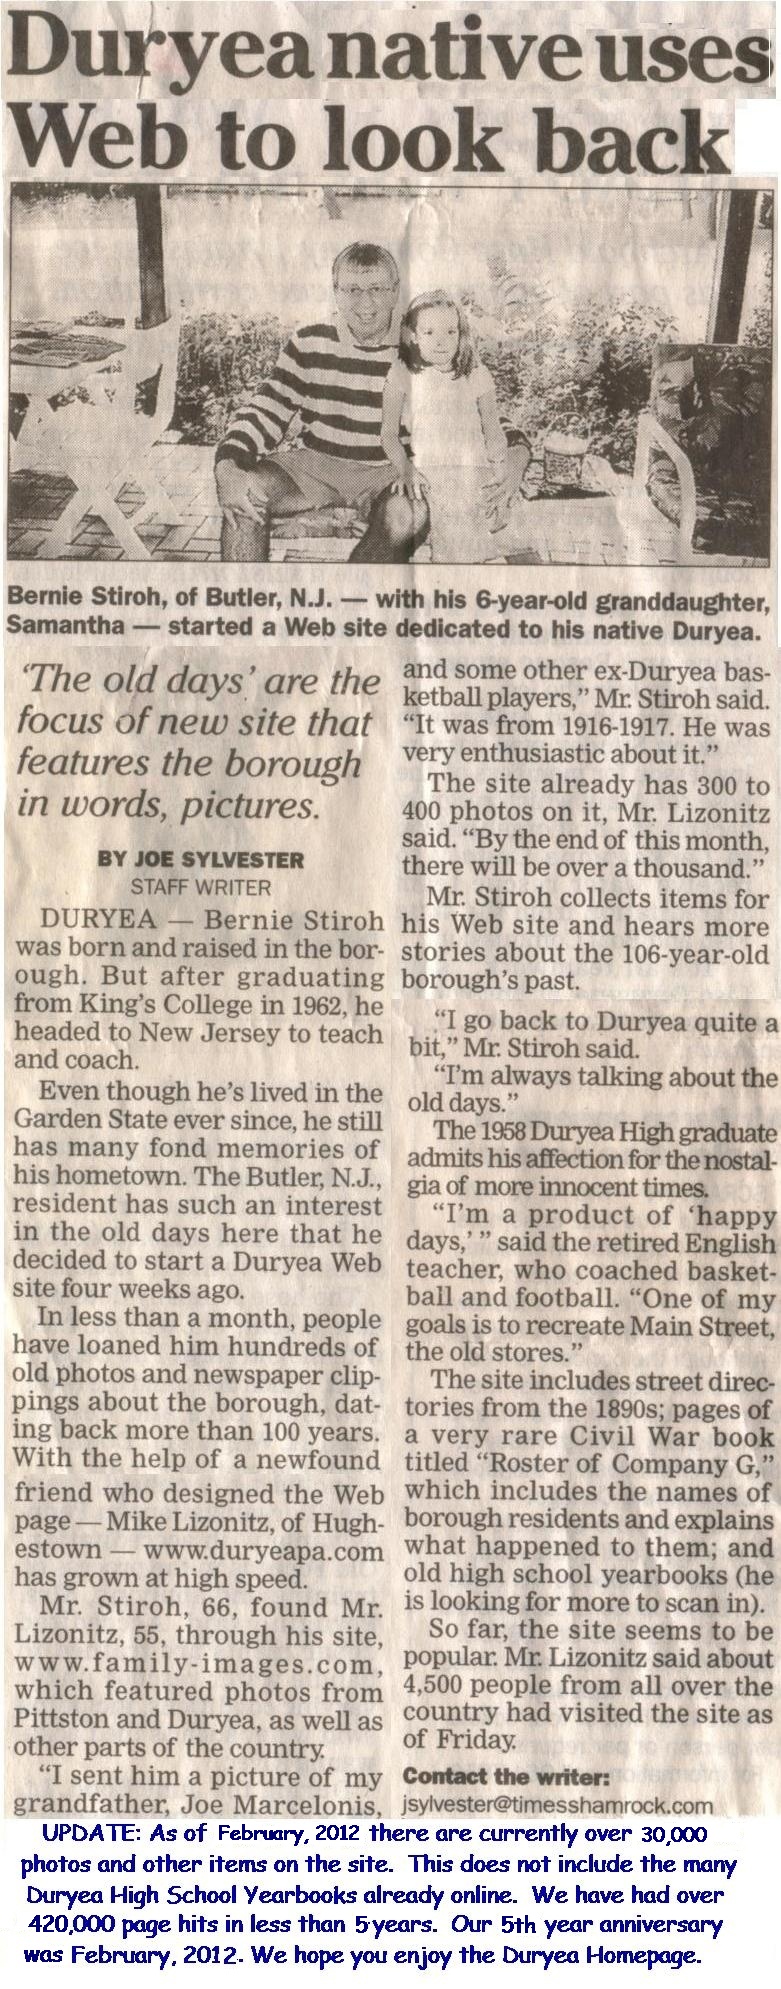 www.duryeapa.com Article about Bernie Stiroh and the Duryea PA Website